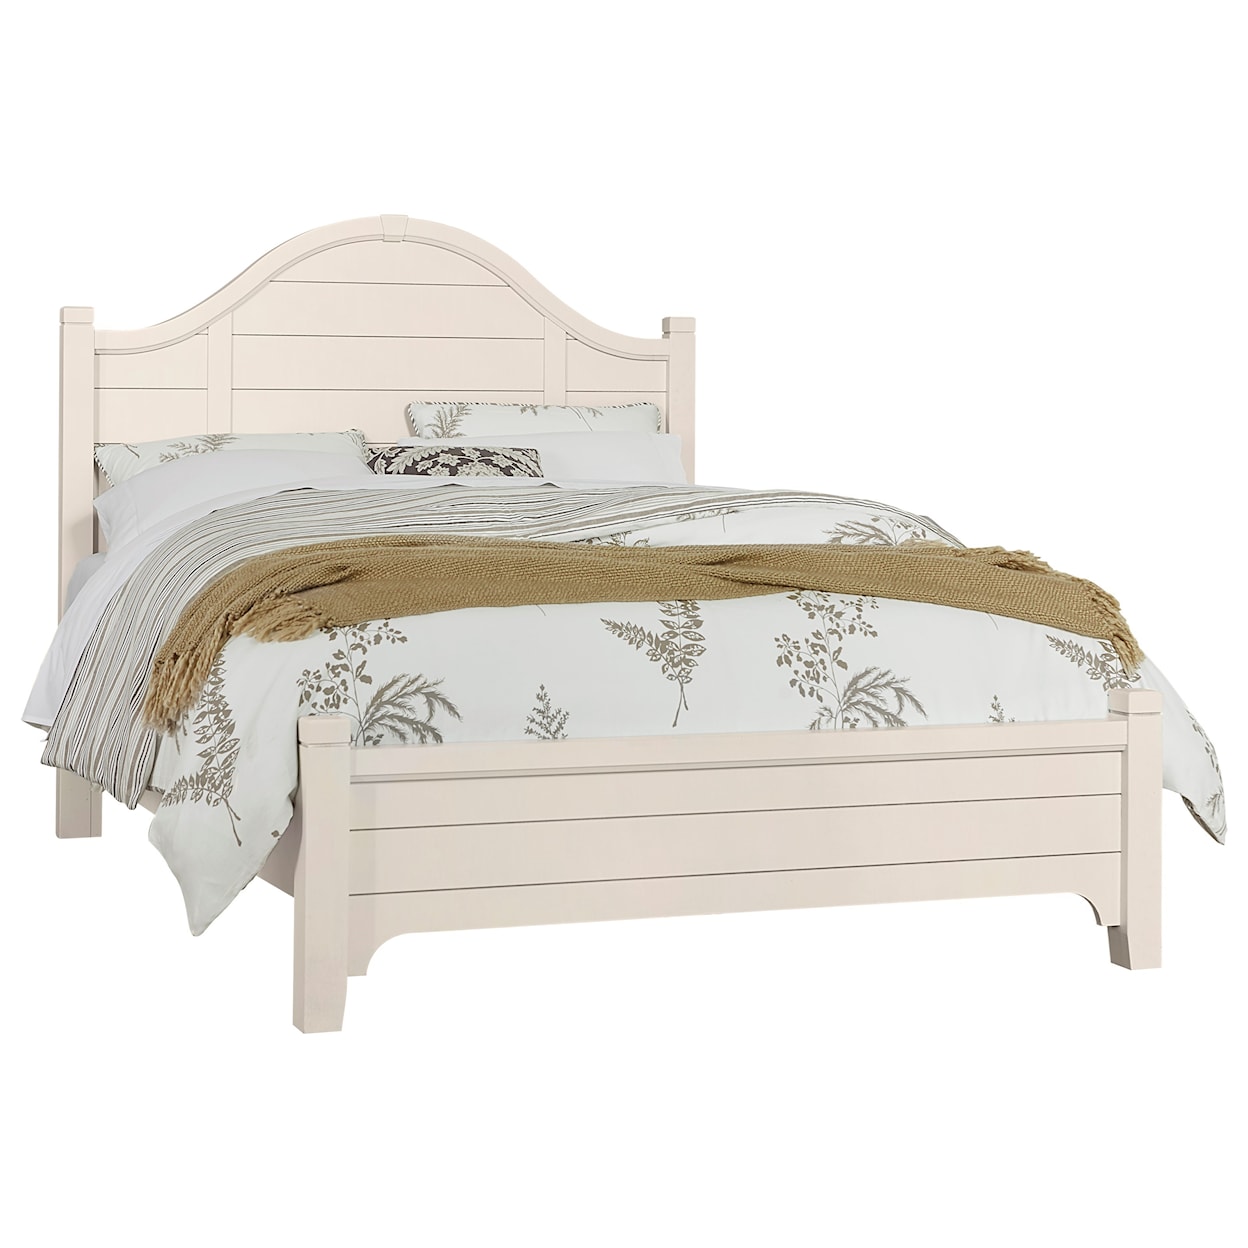 Vaughan-Bassett Bungalow Queen Arch Bed Low Profile Footboard